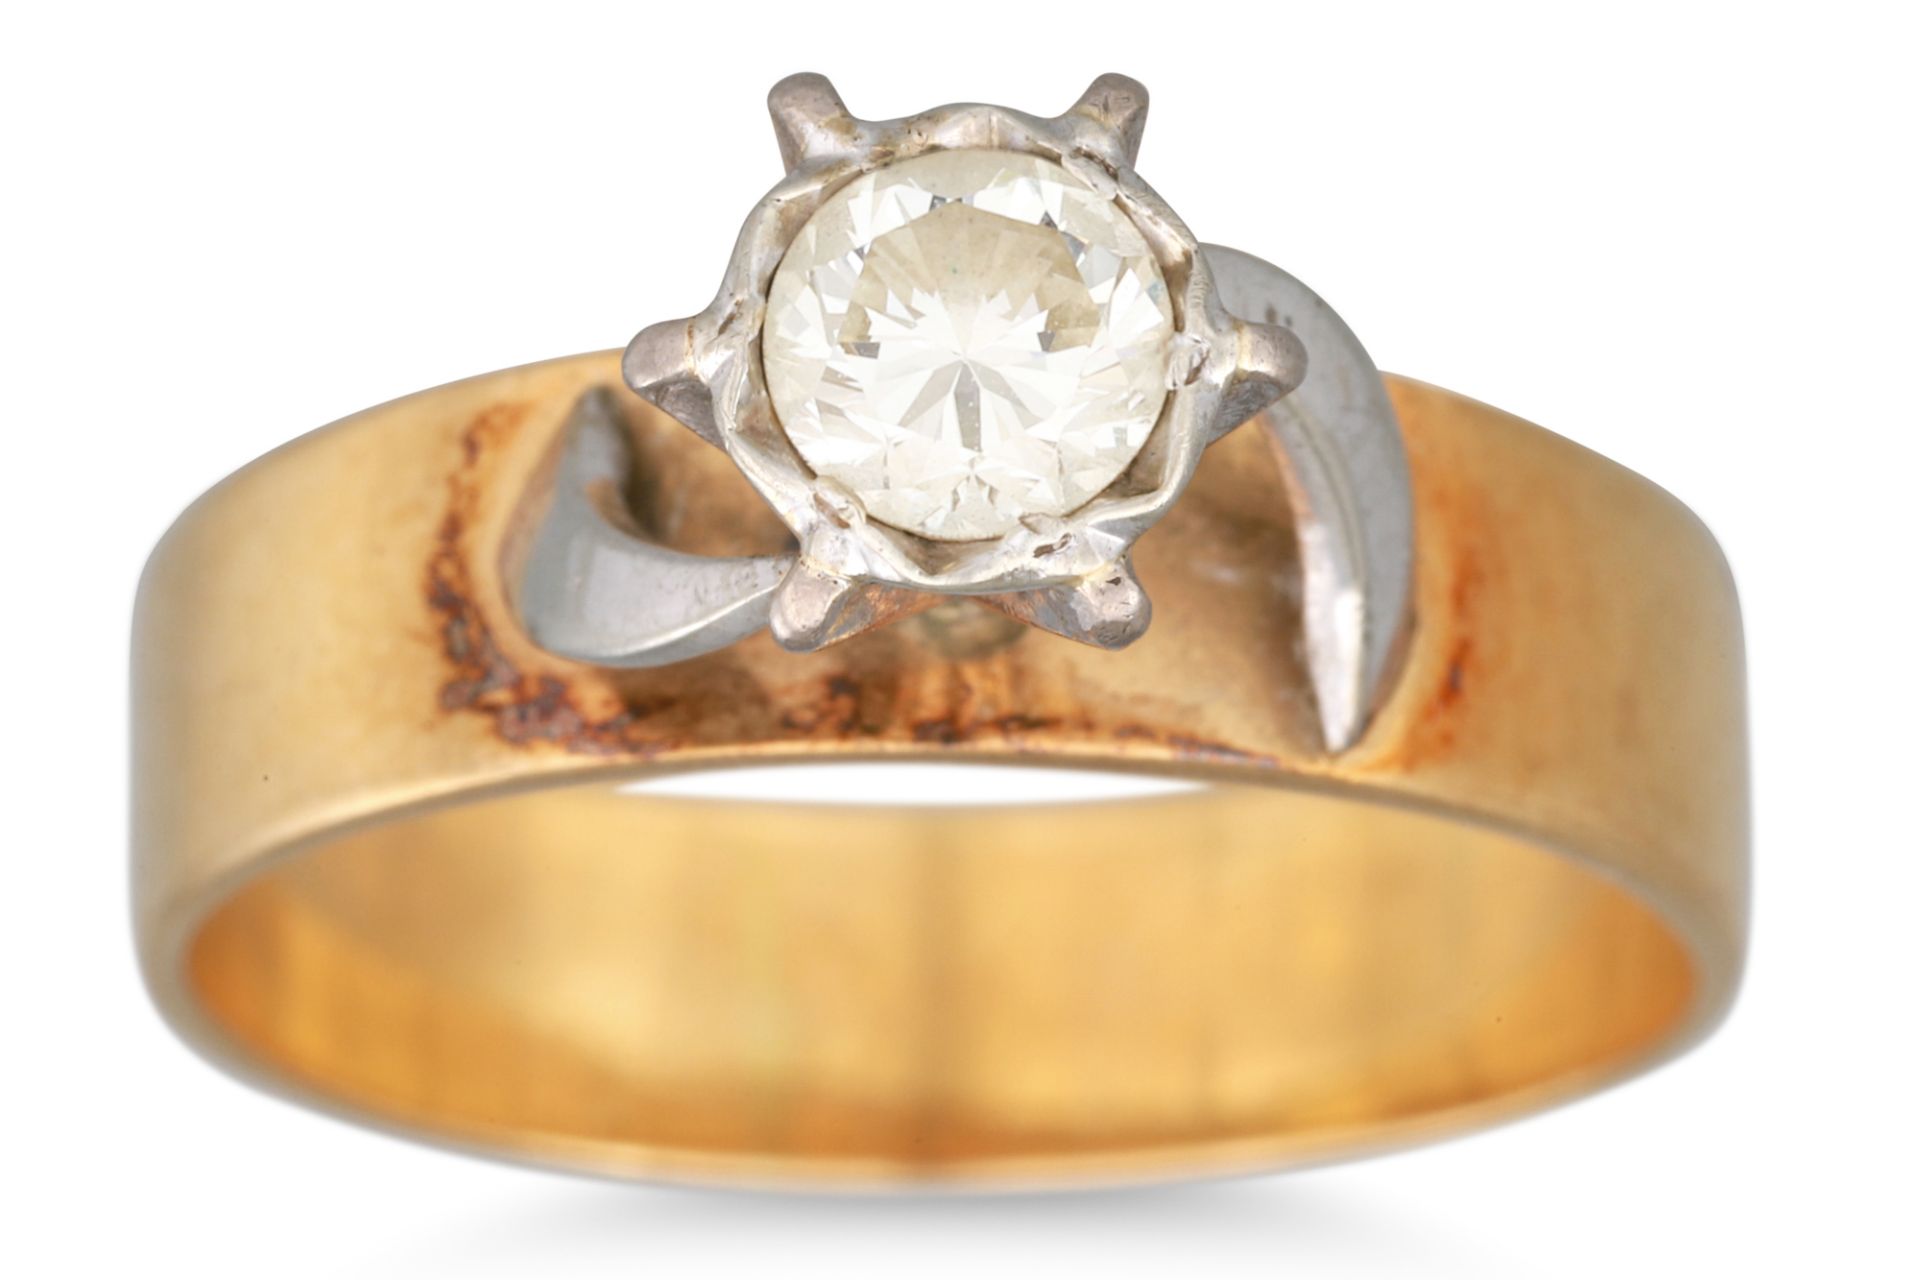 A DIAMOND SOLITAIRE RING, the high set round brilliant cut diamond mounted in 18ct gold, wideband,